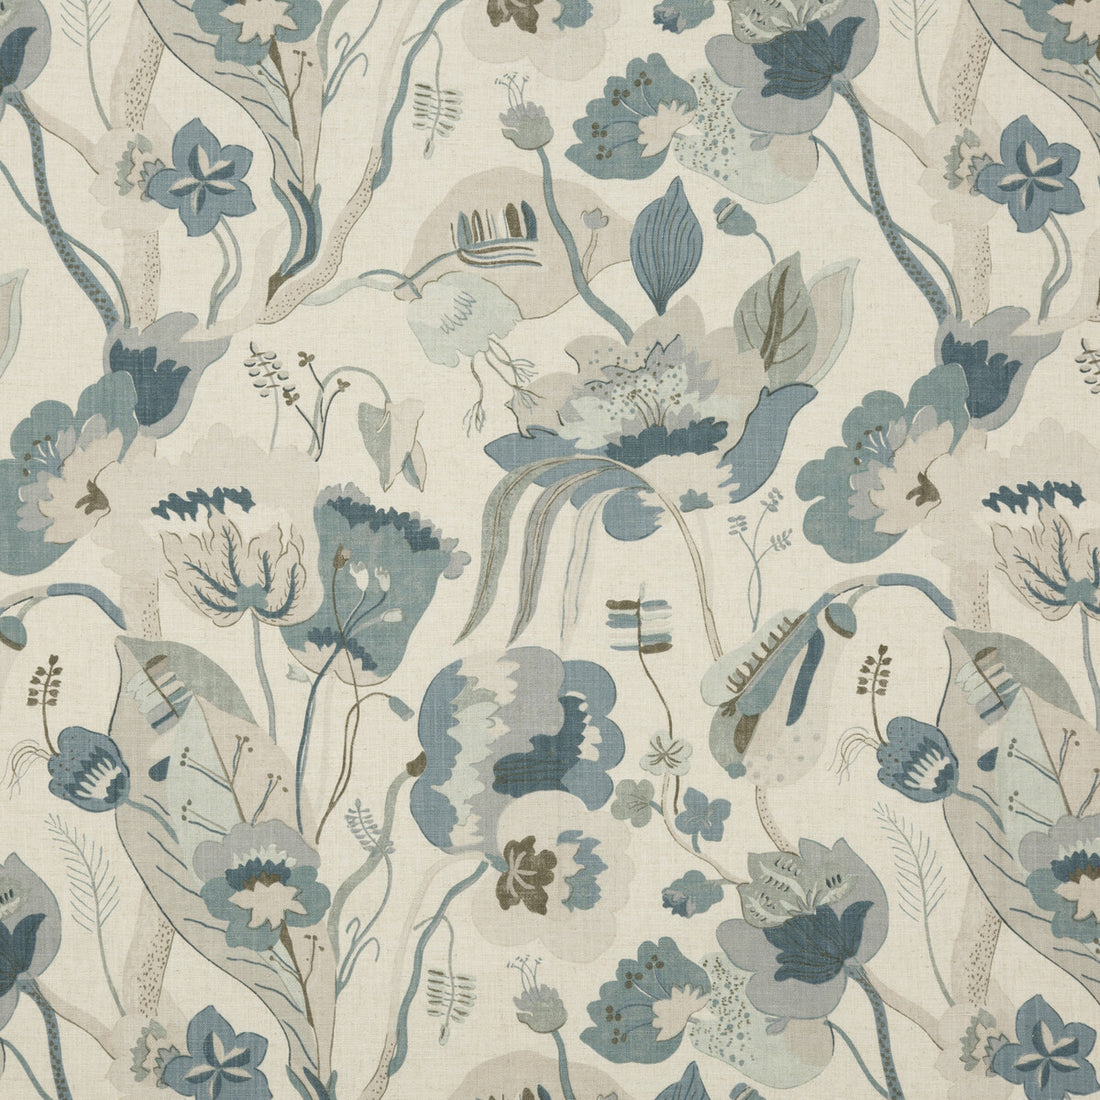 California fabric in linen/denim color - pattern BP10631.2.0 - by G P &amp; J Baker in the Specials Book collection